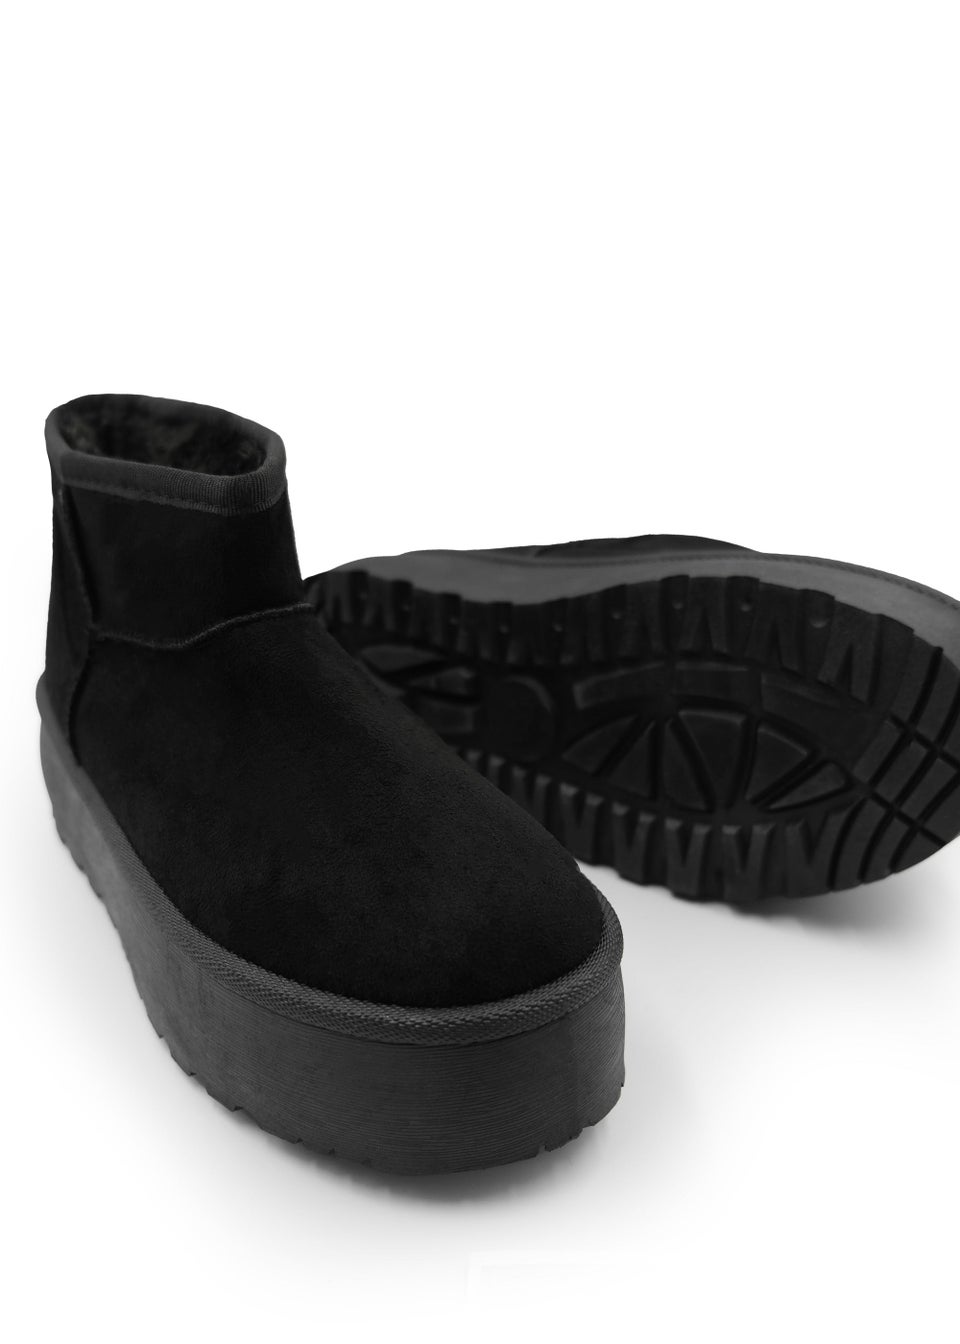 Where's That From Black Suede Erica Slip On Ankle Boots